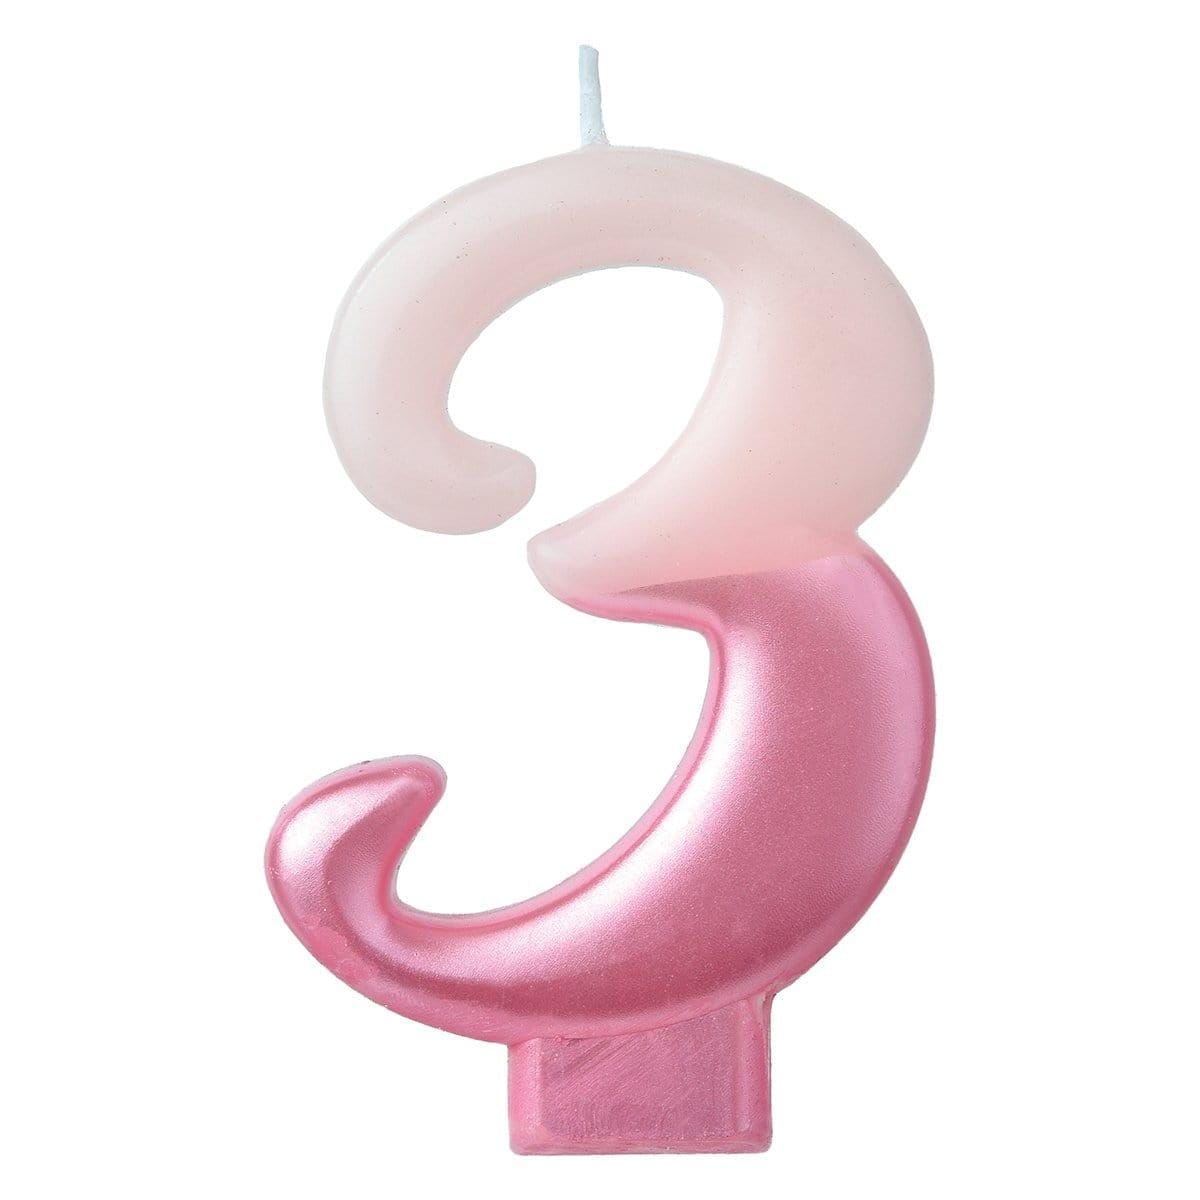 Buy Cake Supplies Pink Numeral Candle #3 sold at Party Expert